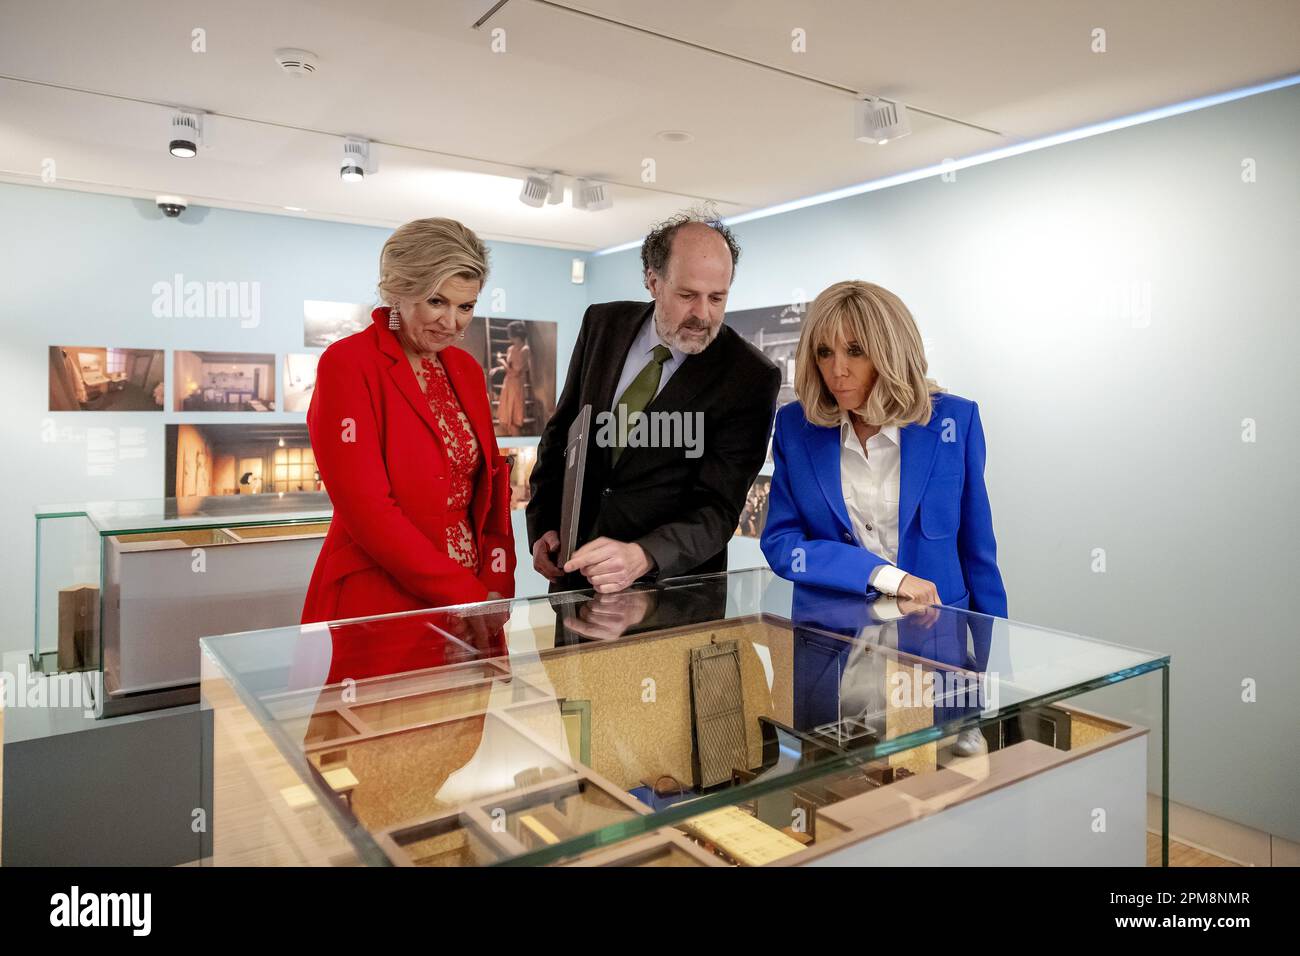 Amsterdam, Netherlands. 12th April, 2023. AMSTERDAM - The French first lady Brigitte Macron (r) and Queen Maxima view a model during a visit to the Anne Frank House. The French presidential couple is paying a two-day state visit to the Netherlands. ANP POOL ROBIN VAN LONKHUIJSEN netherlands out - belgium out Credit: ANP/Alamy Live News Credit: ANP/Alamy Live News Stock Photo